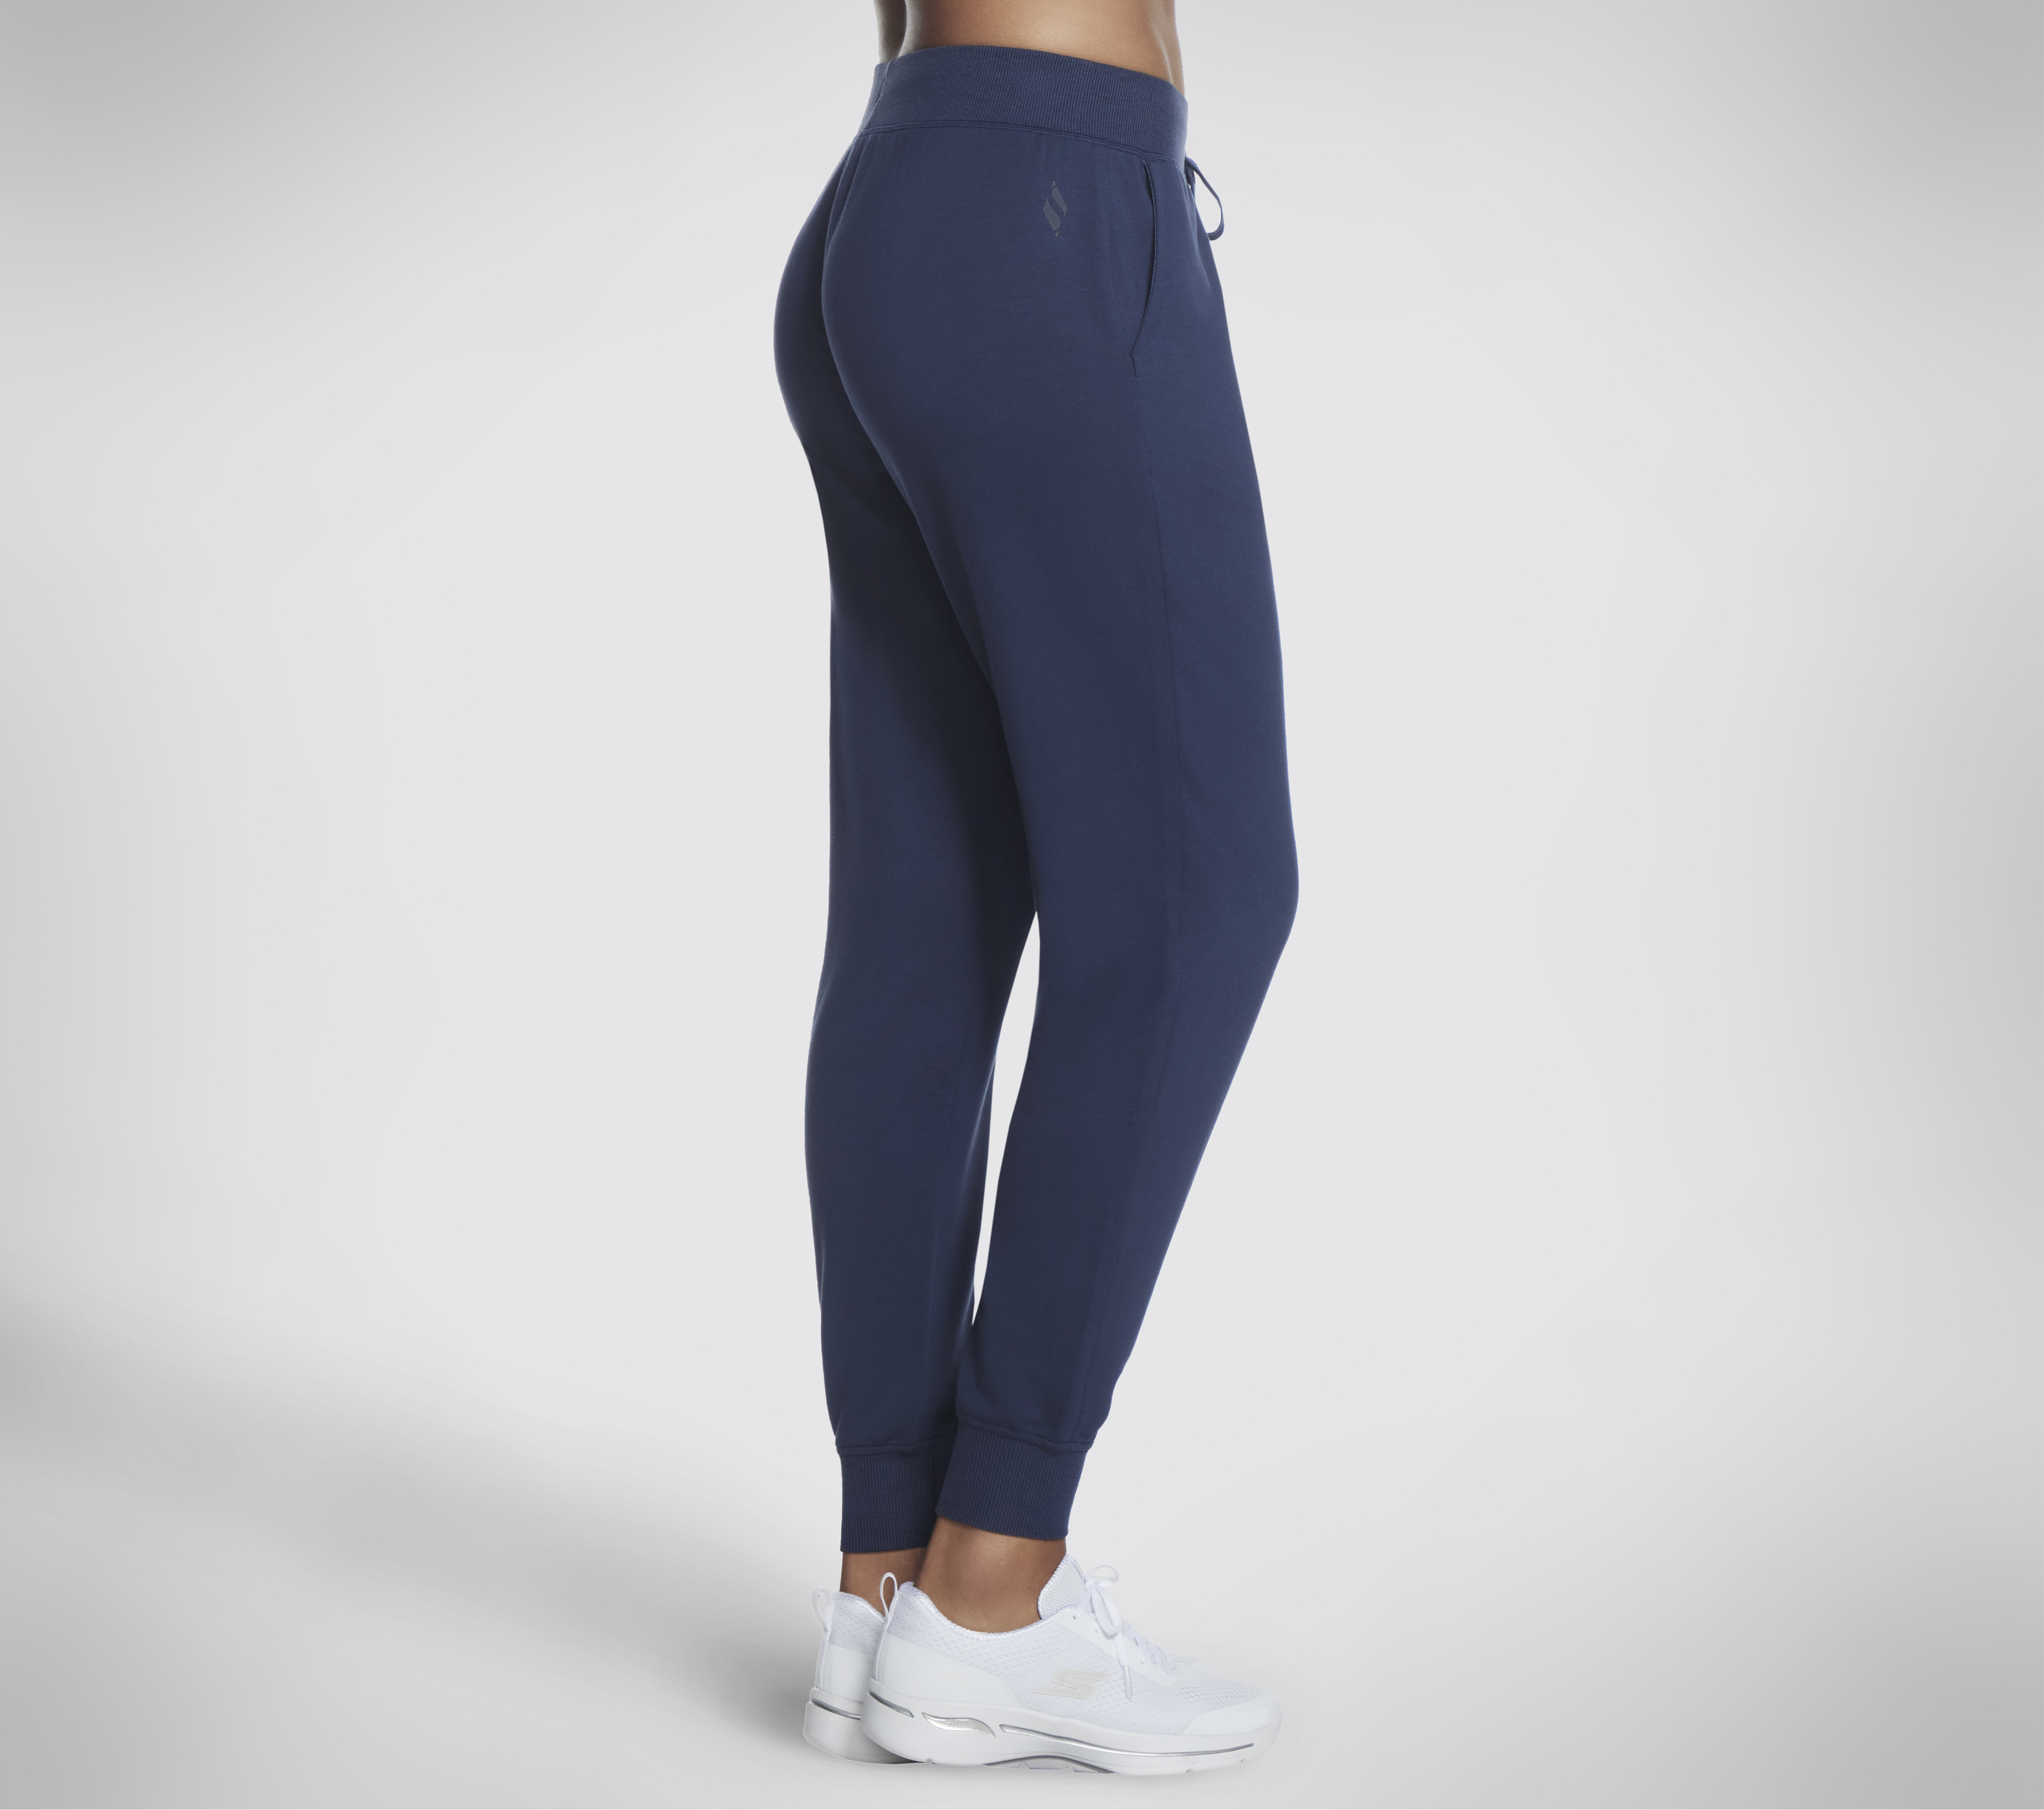 Shop the SKECHLUXE Restful Jogger Pant